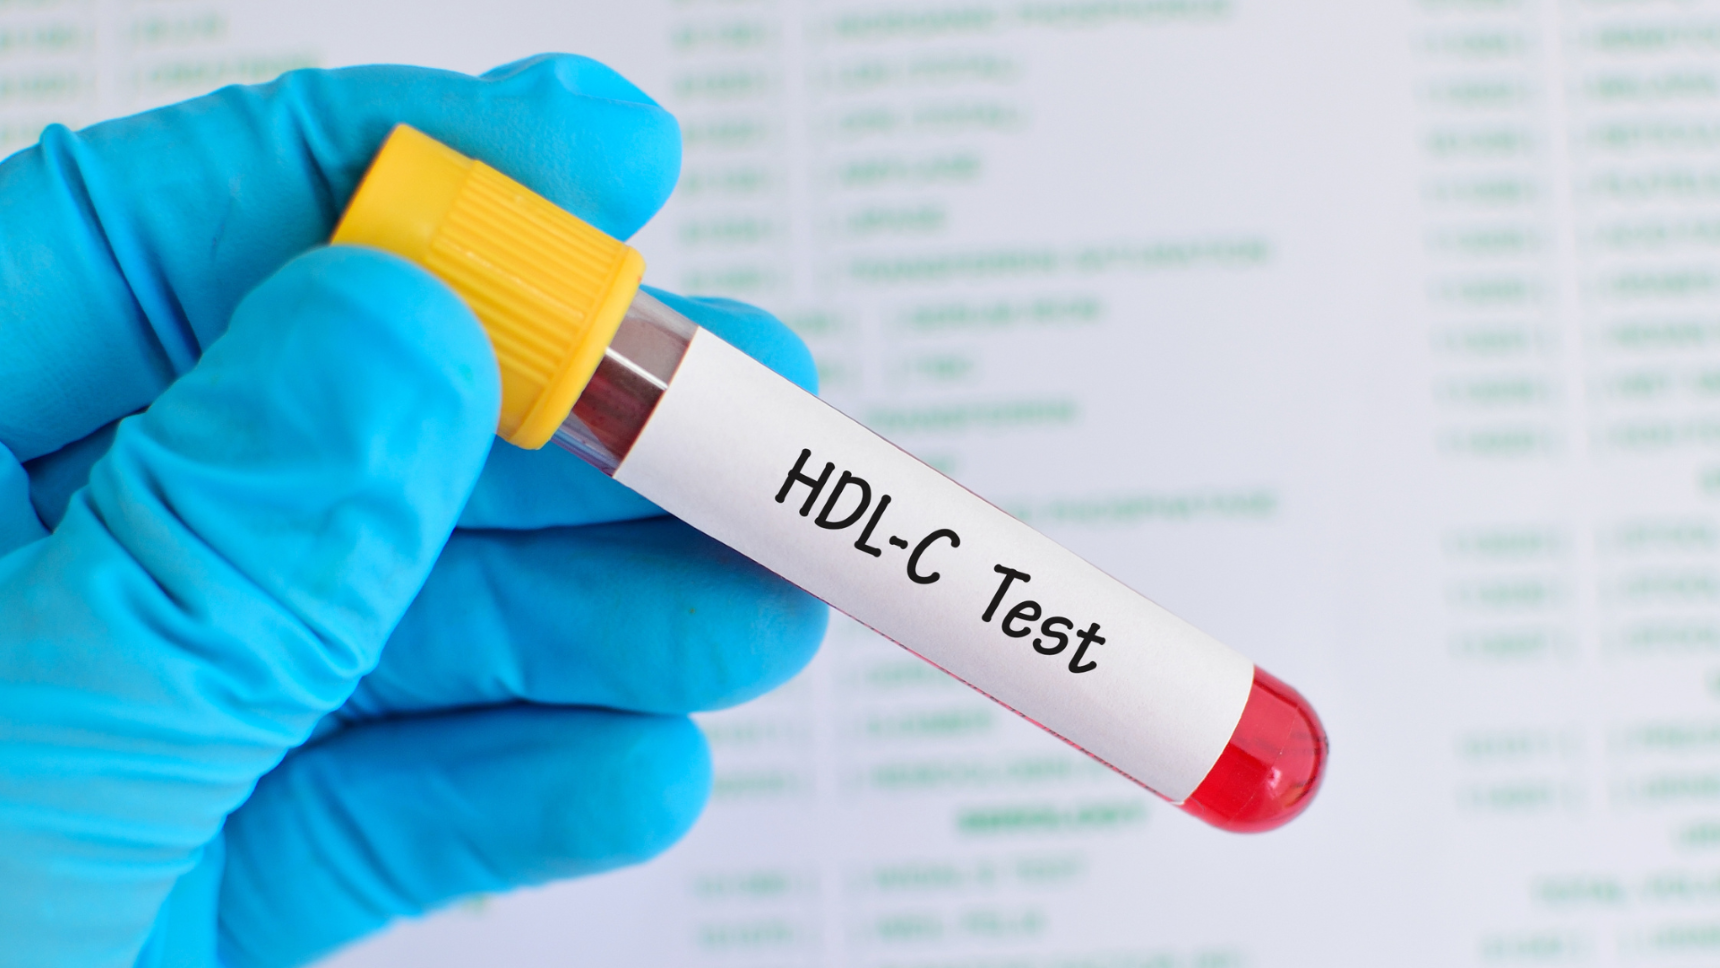 Service testing on the efficiency of High-Density Lipoprotein (HDL) cholesterol production